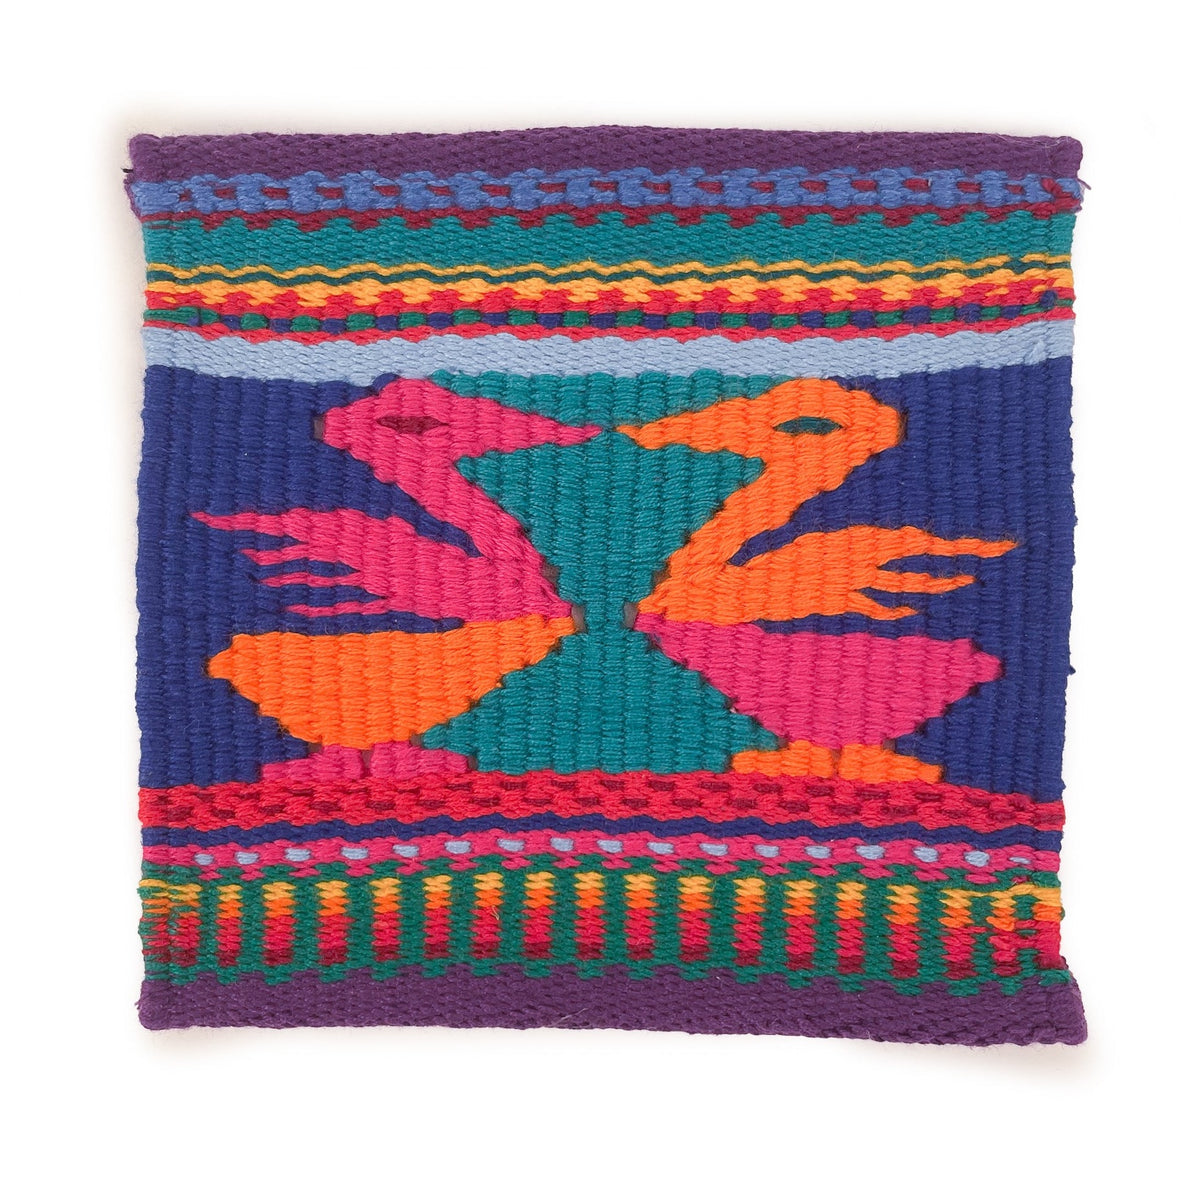 Tapestry woven coaster, featuring  two birds in pink and orange facing each other.  Coaster has a multicolor background of teal and deep blue, with a purple boarder and multicolor striped details